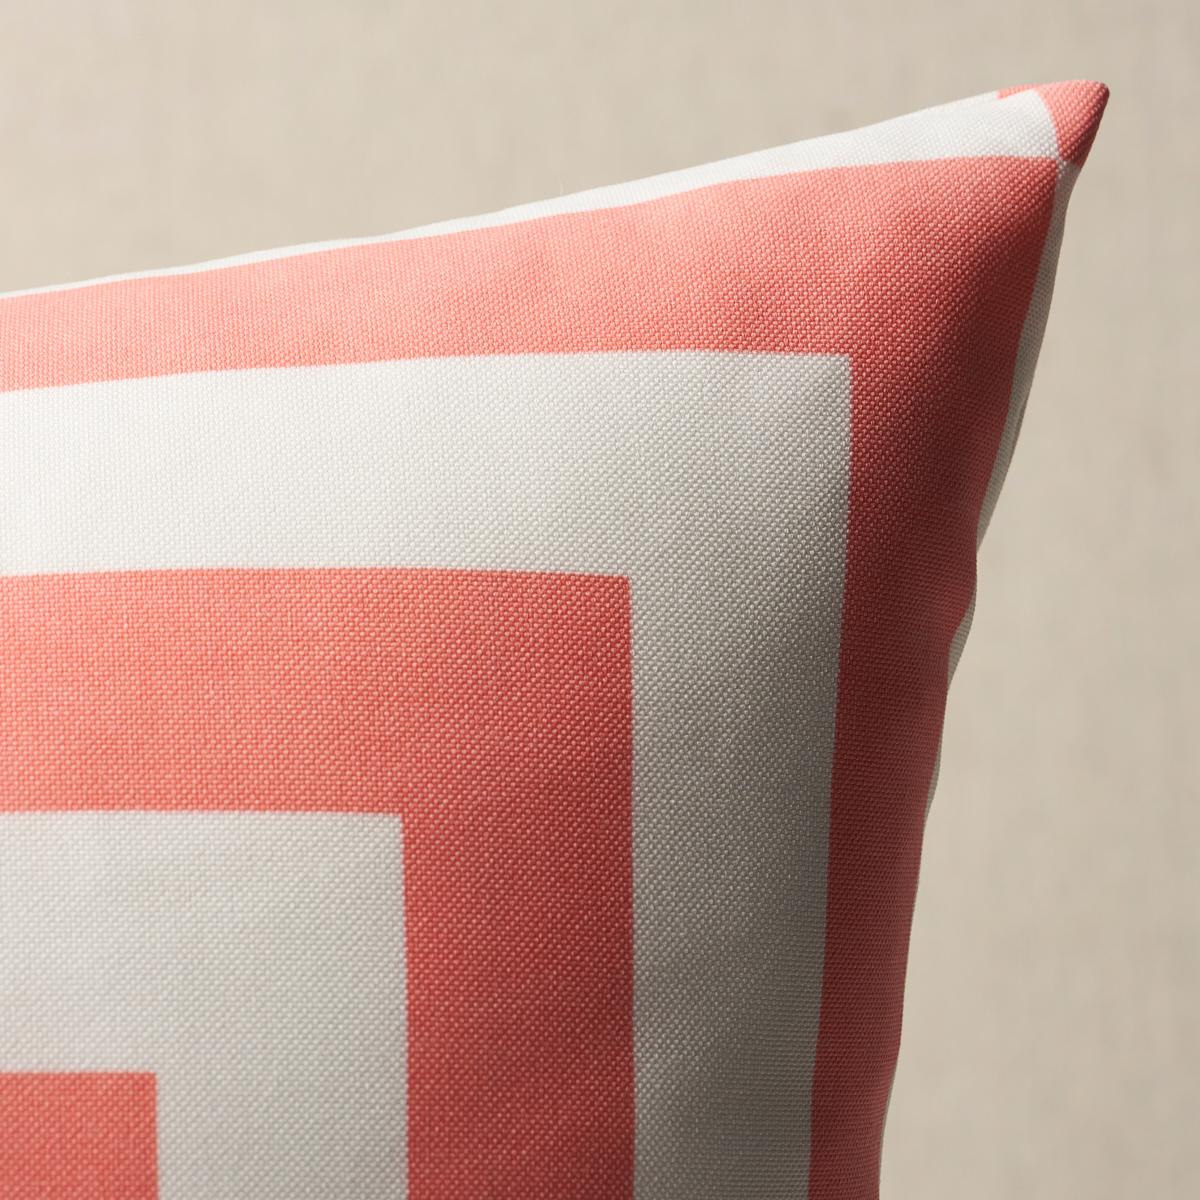 This pillow features Roxbury Indoor/Outdoor with a knife edge finish. A graphic large-scale design, Roxbury Indoor/Outdoor in navy is a bold geometric that invites pattern play. Pillow includes a polyfill insert and hidden zipper closure.